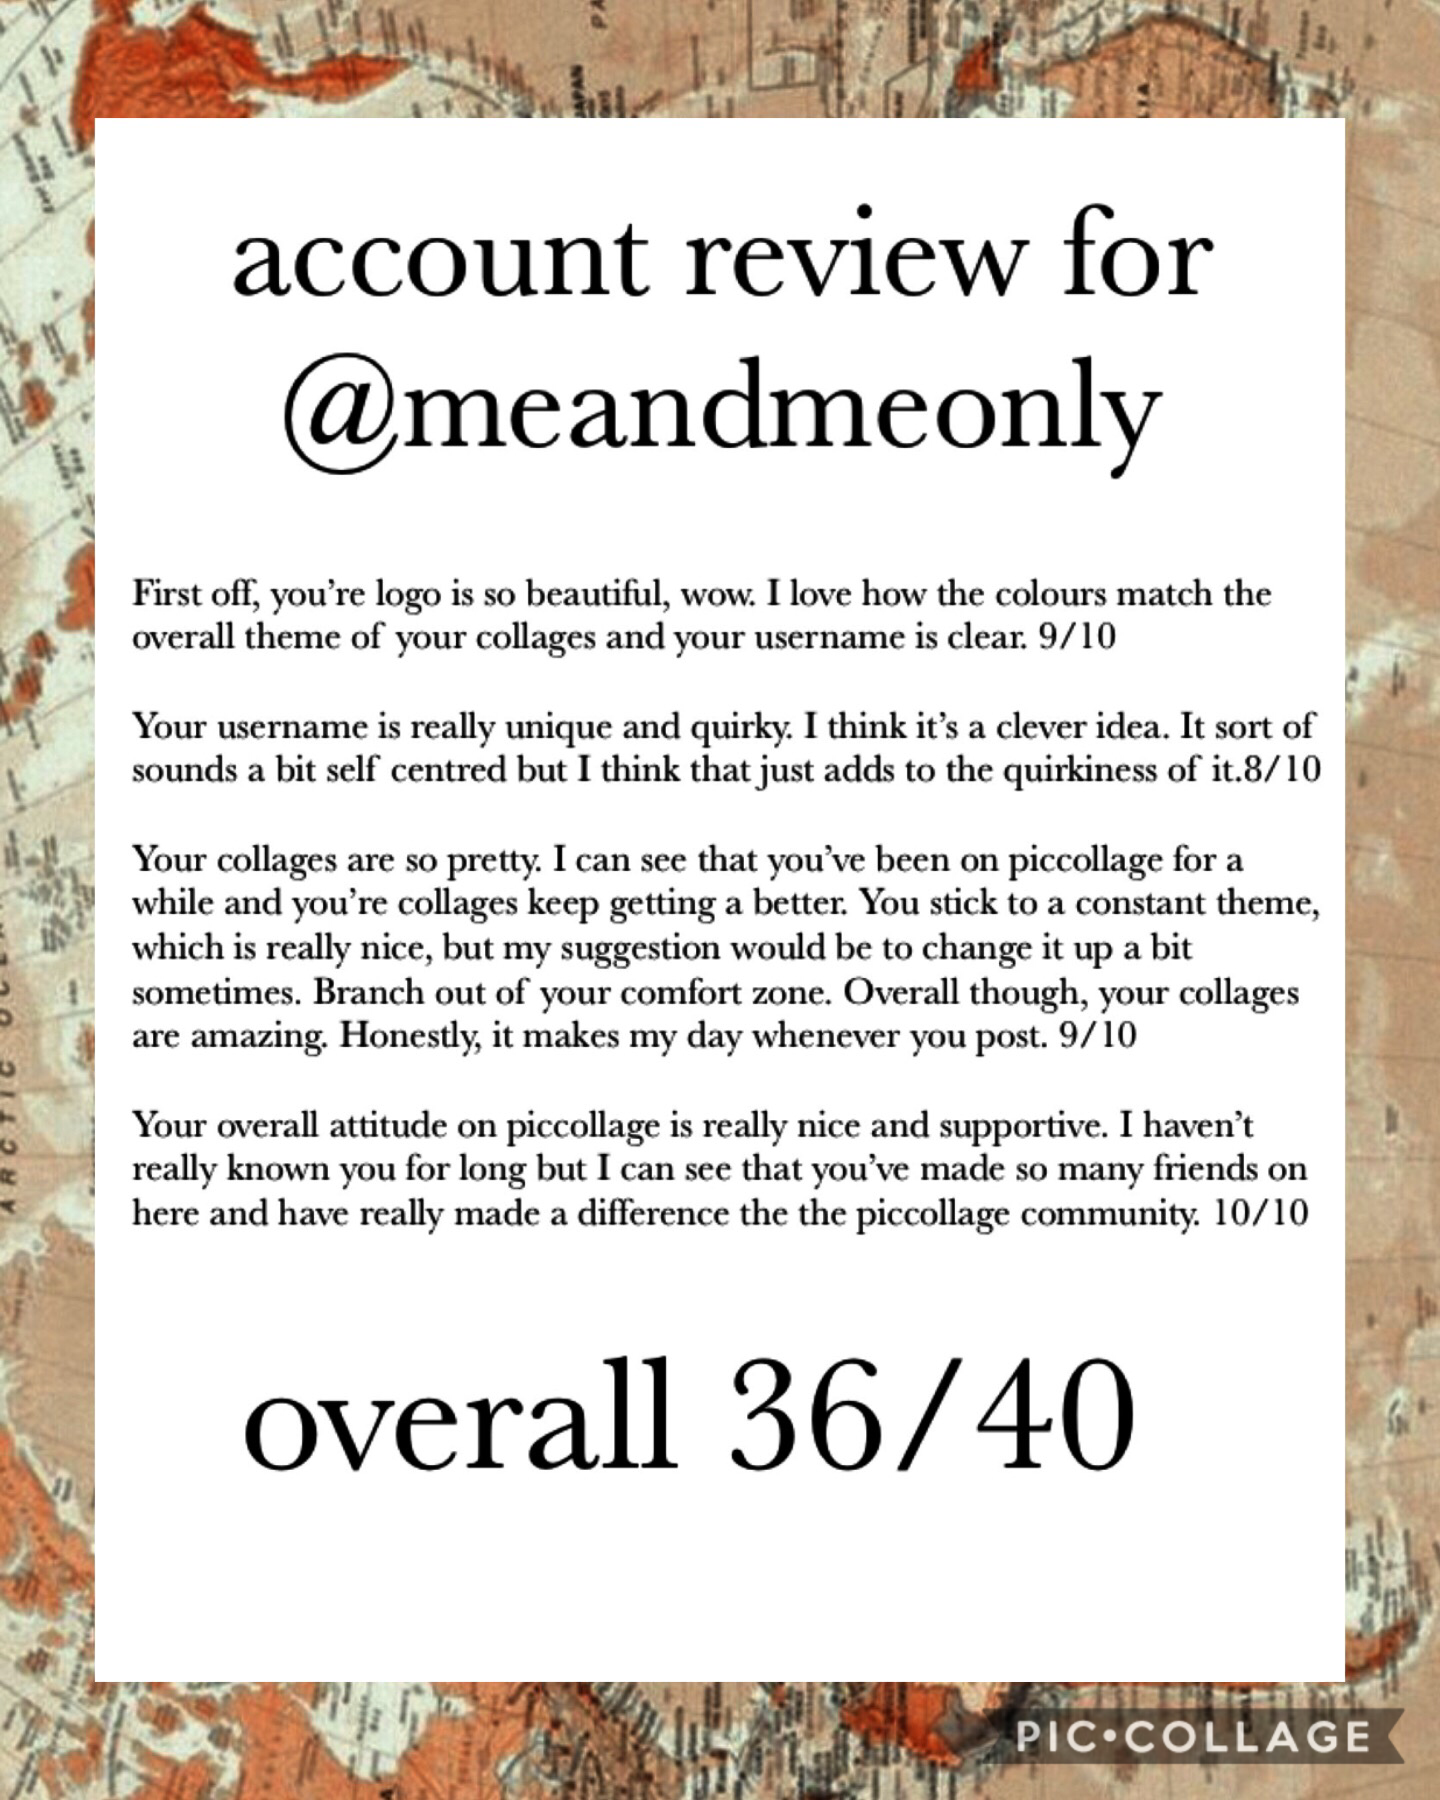 Account review for @meandmeonly